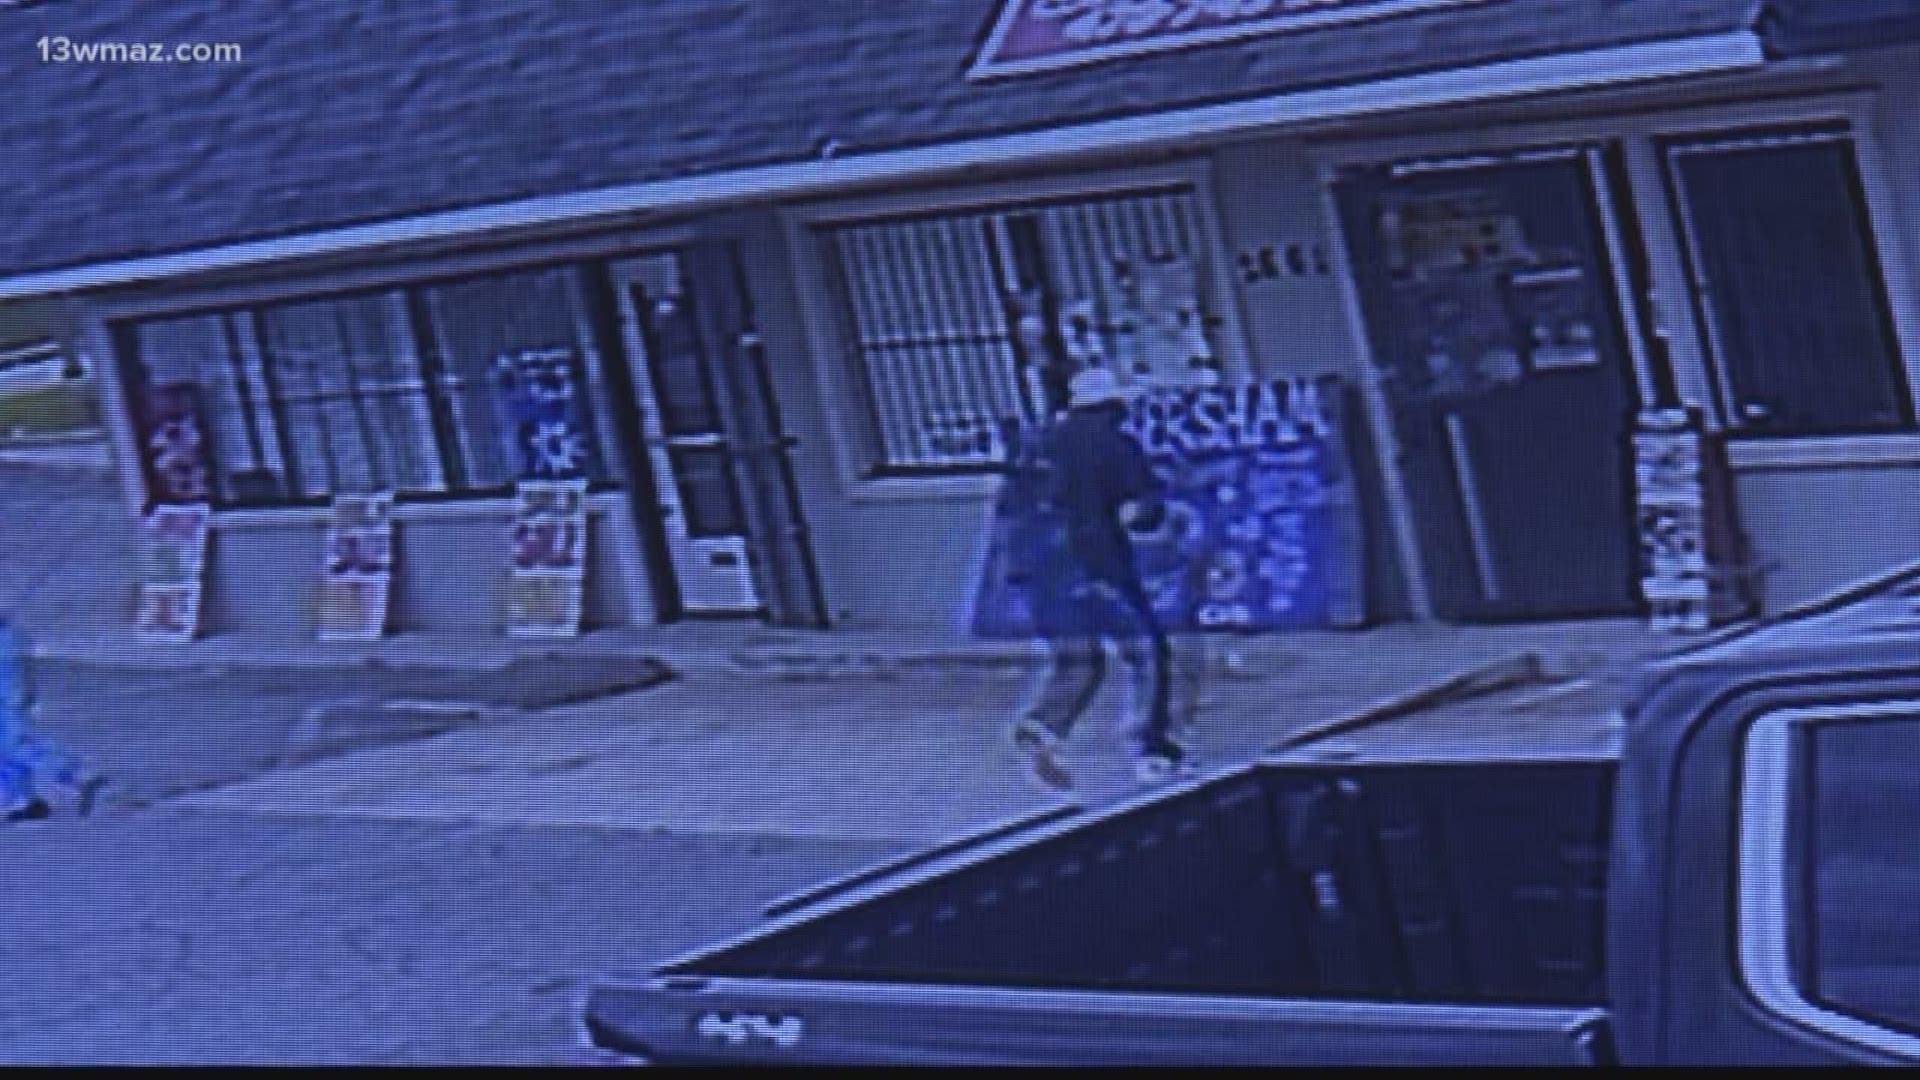 An armed robbery at a well-known Macon record store led to a foot chase on Pio Nono Avenue. It all made for a scary afternoon in one Macon neighborhood.